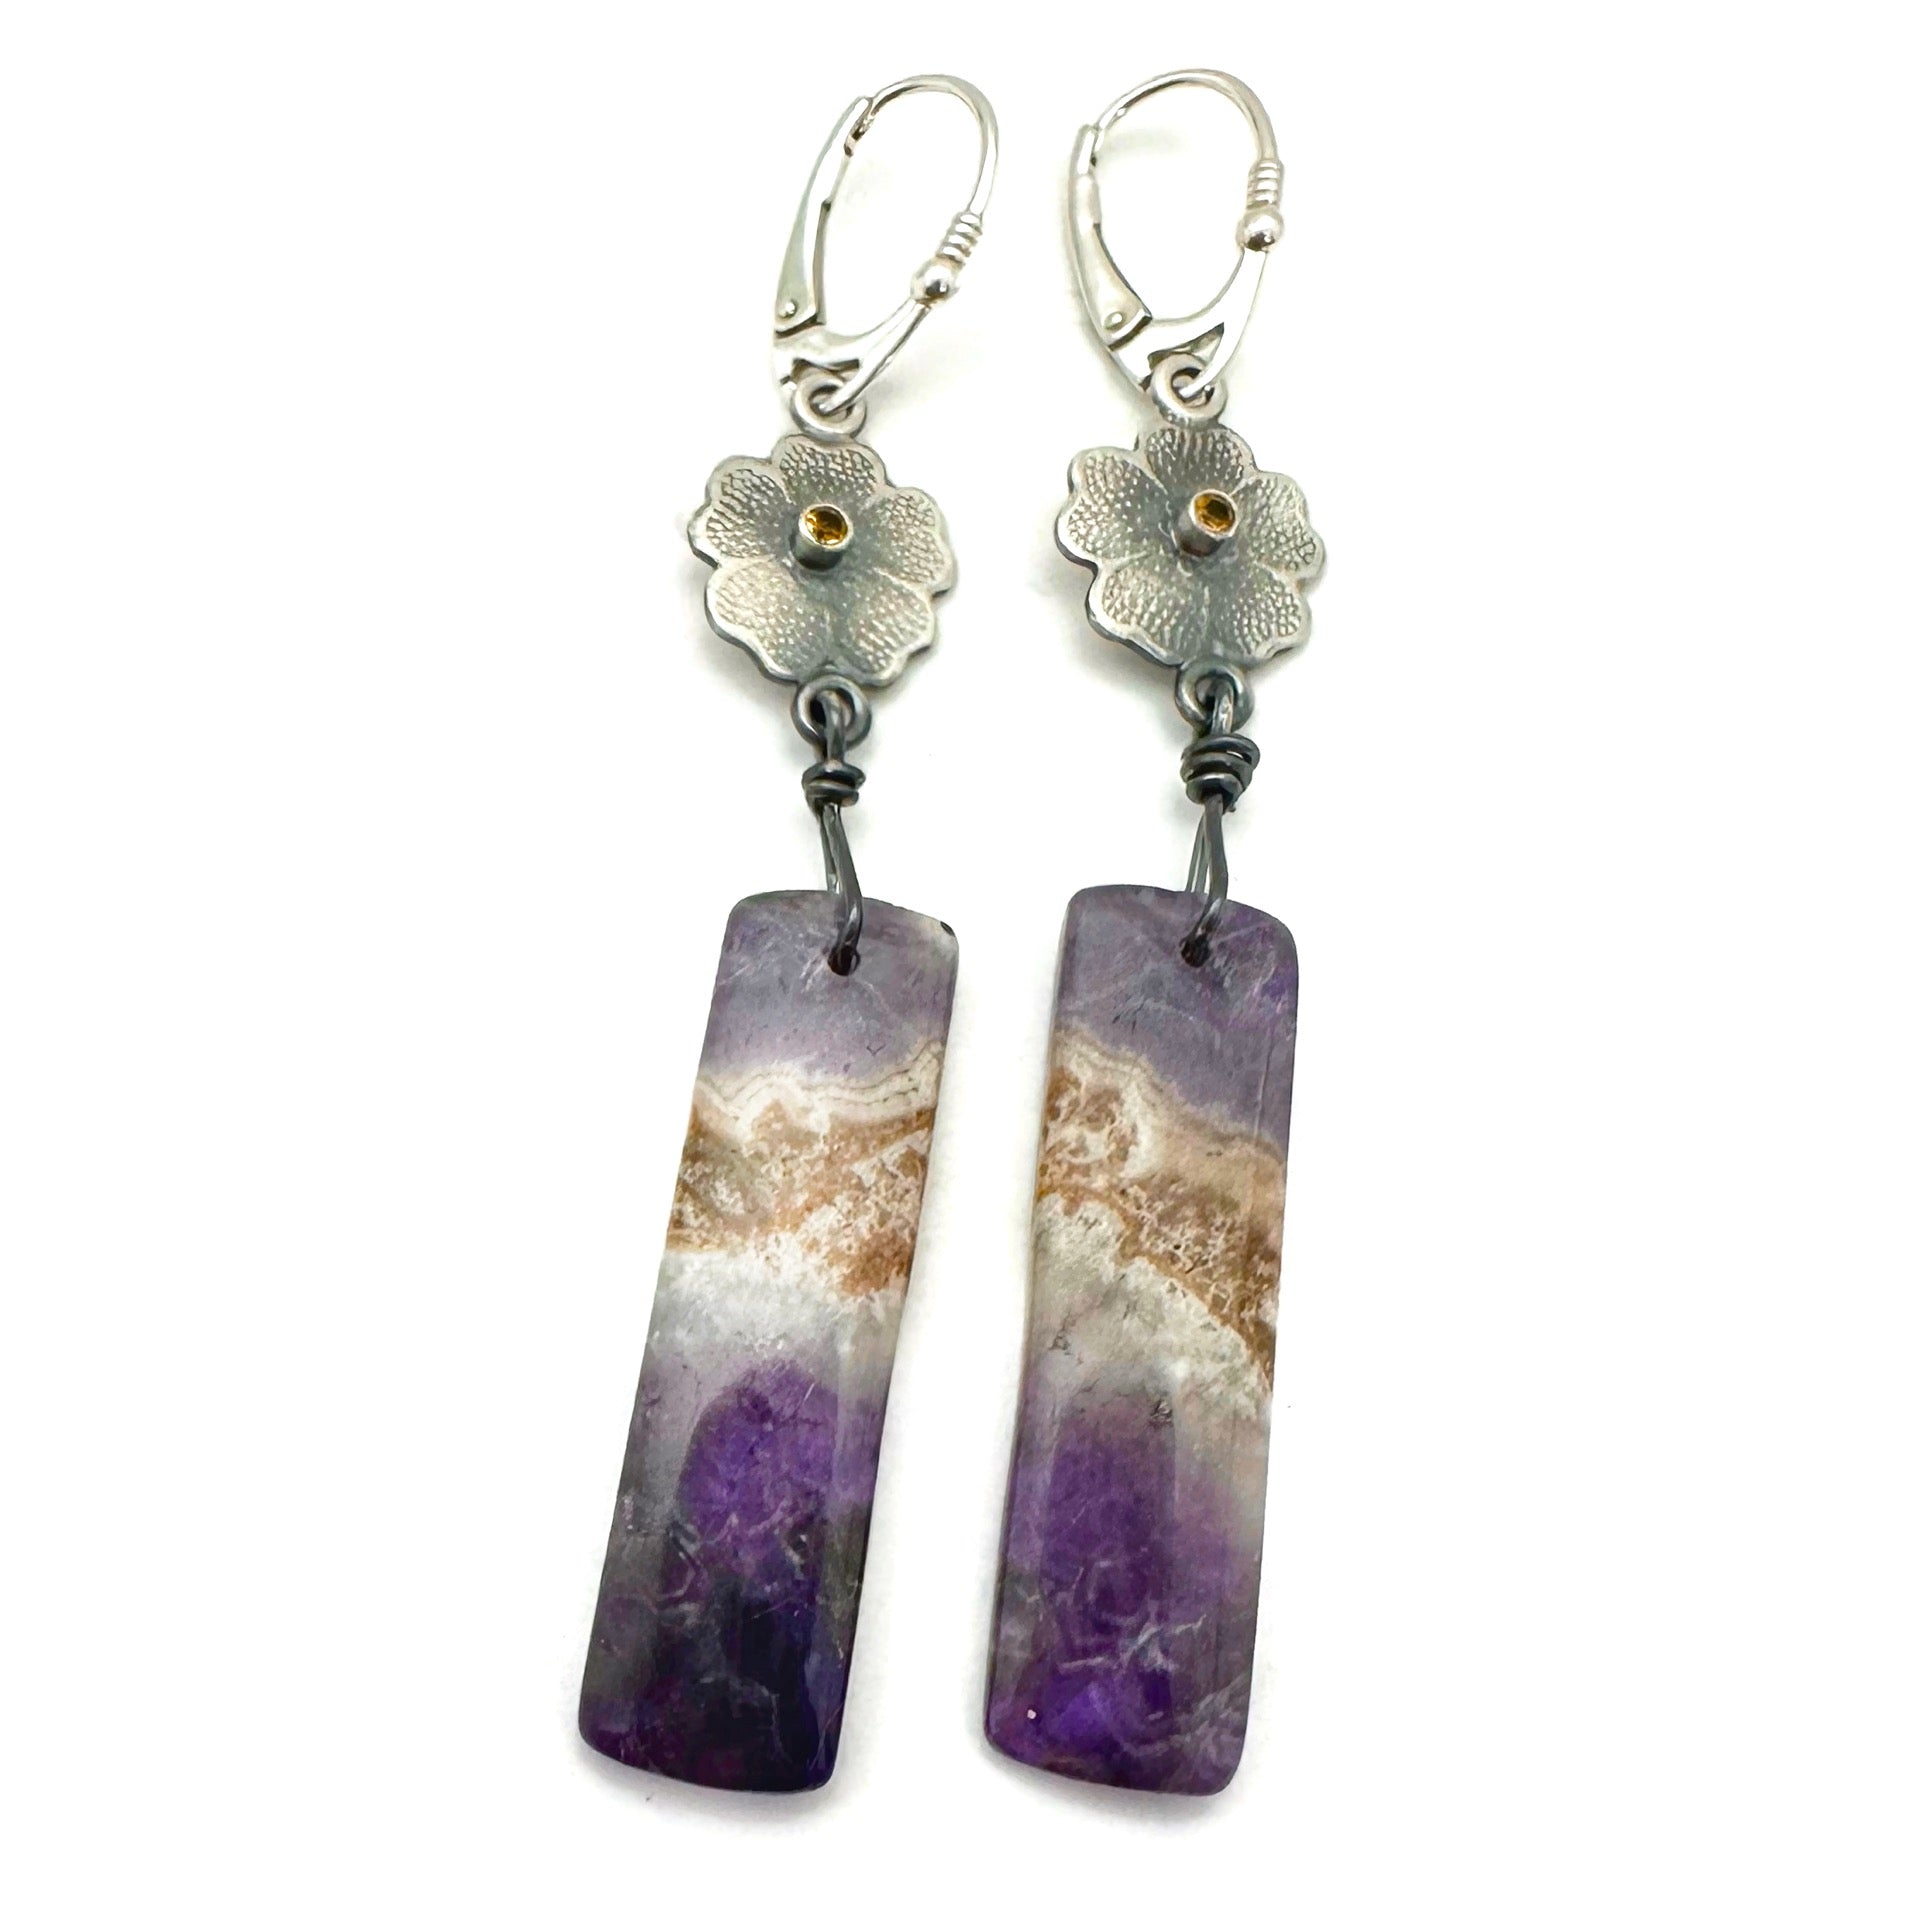 Botanical Earrings Sterling Silver with Chevron Amethyst and Yellow Citrine